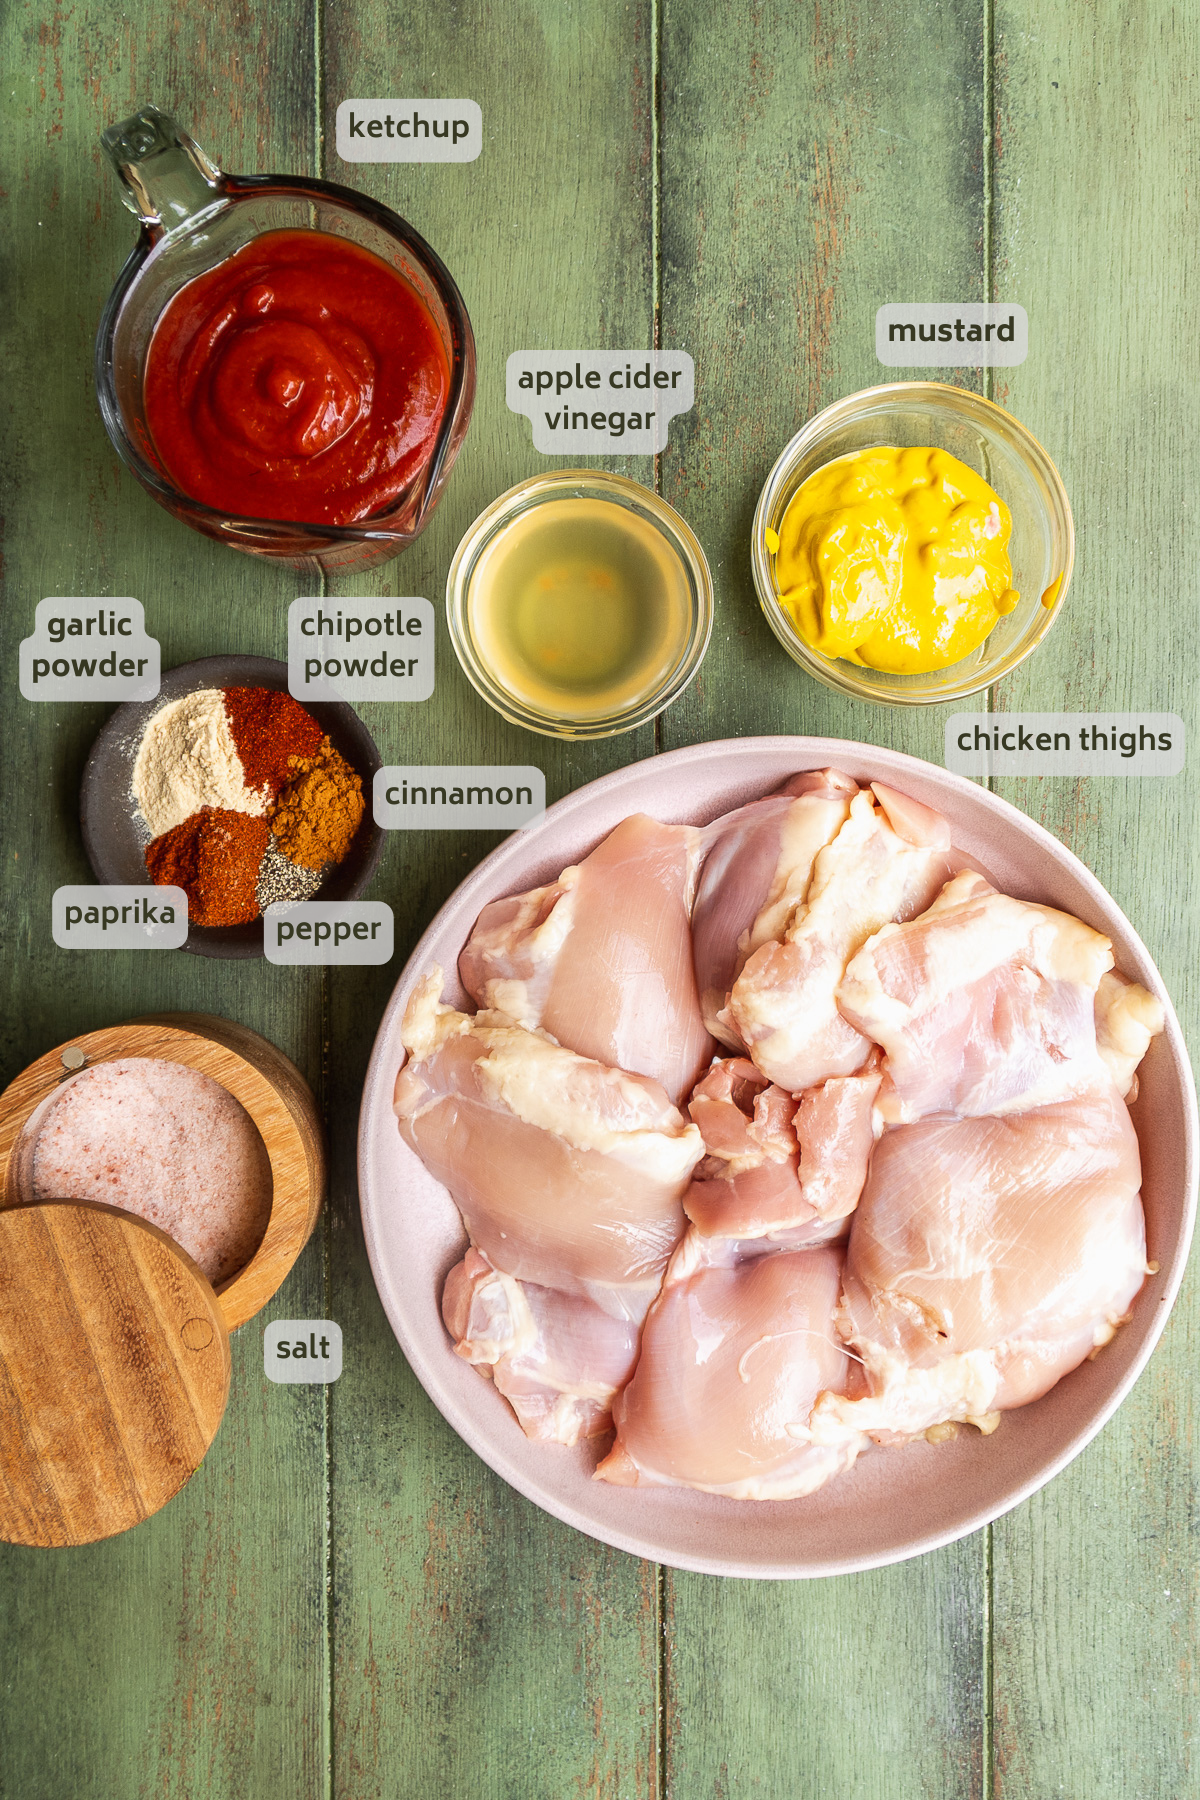 Baked bbq chicken thigh ingredients on a green surface.